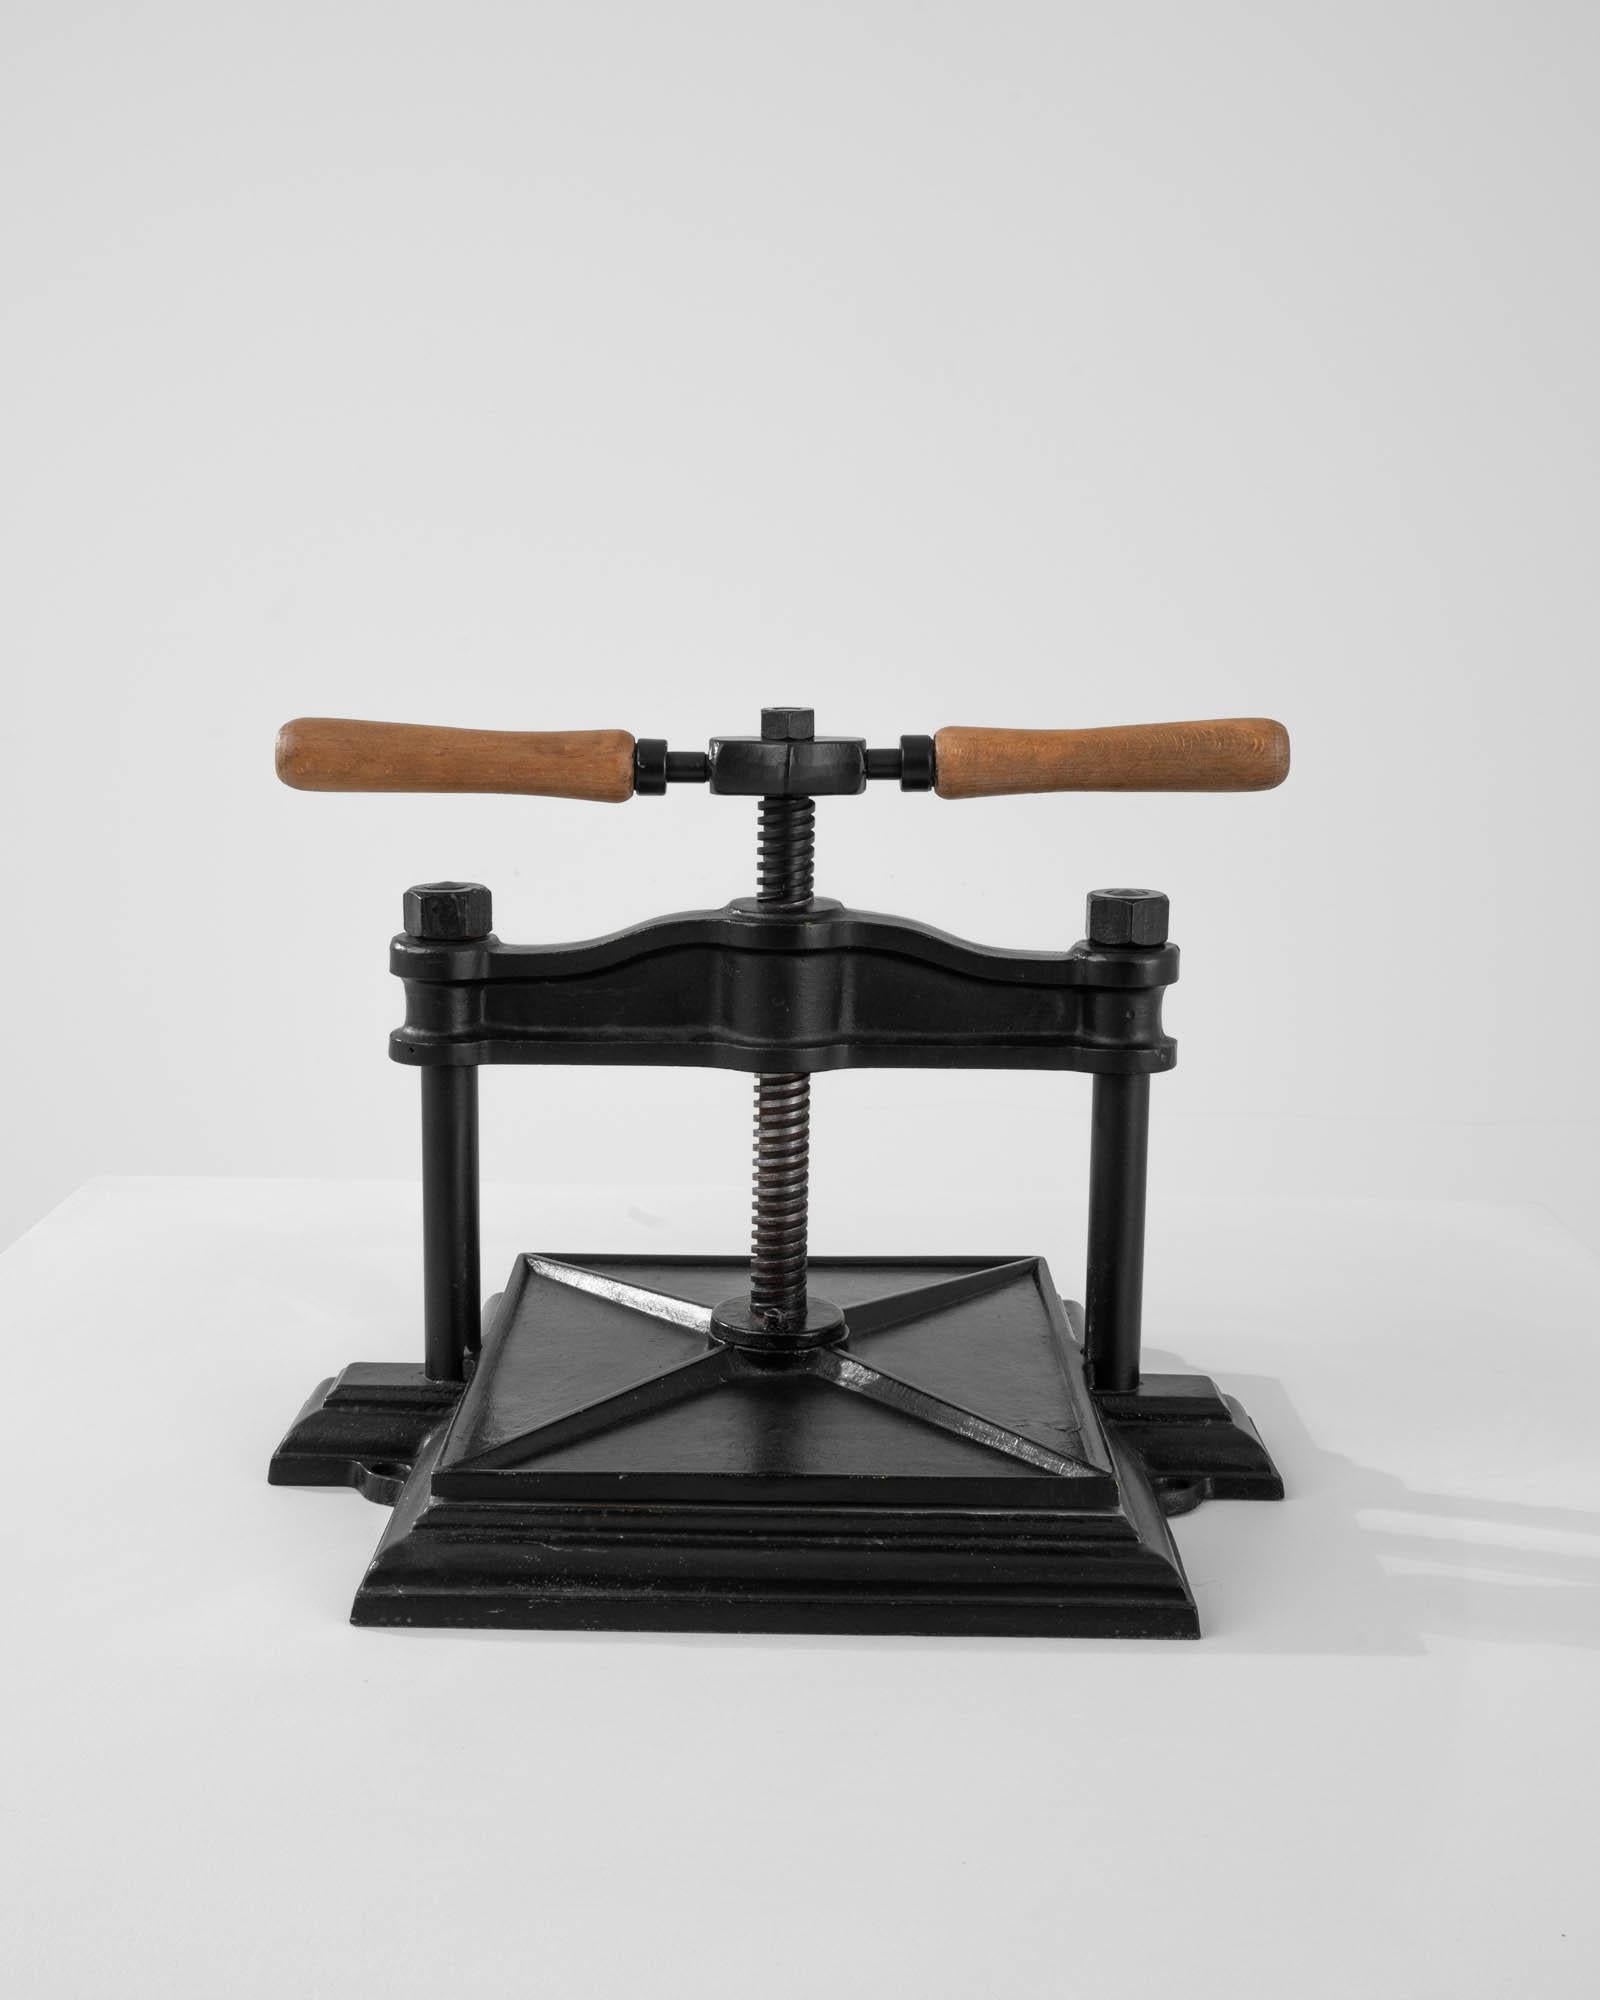 A cast iron press from 20th Century Belgium. Originally purposed as a book-binding press used in such places as banks or libraries, this unique antiquity suggests a niche function, while providing a universal visual appeal. This press features a